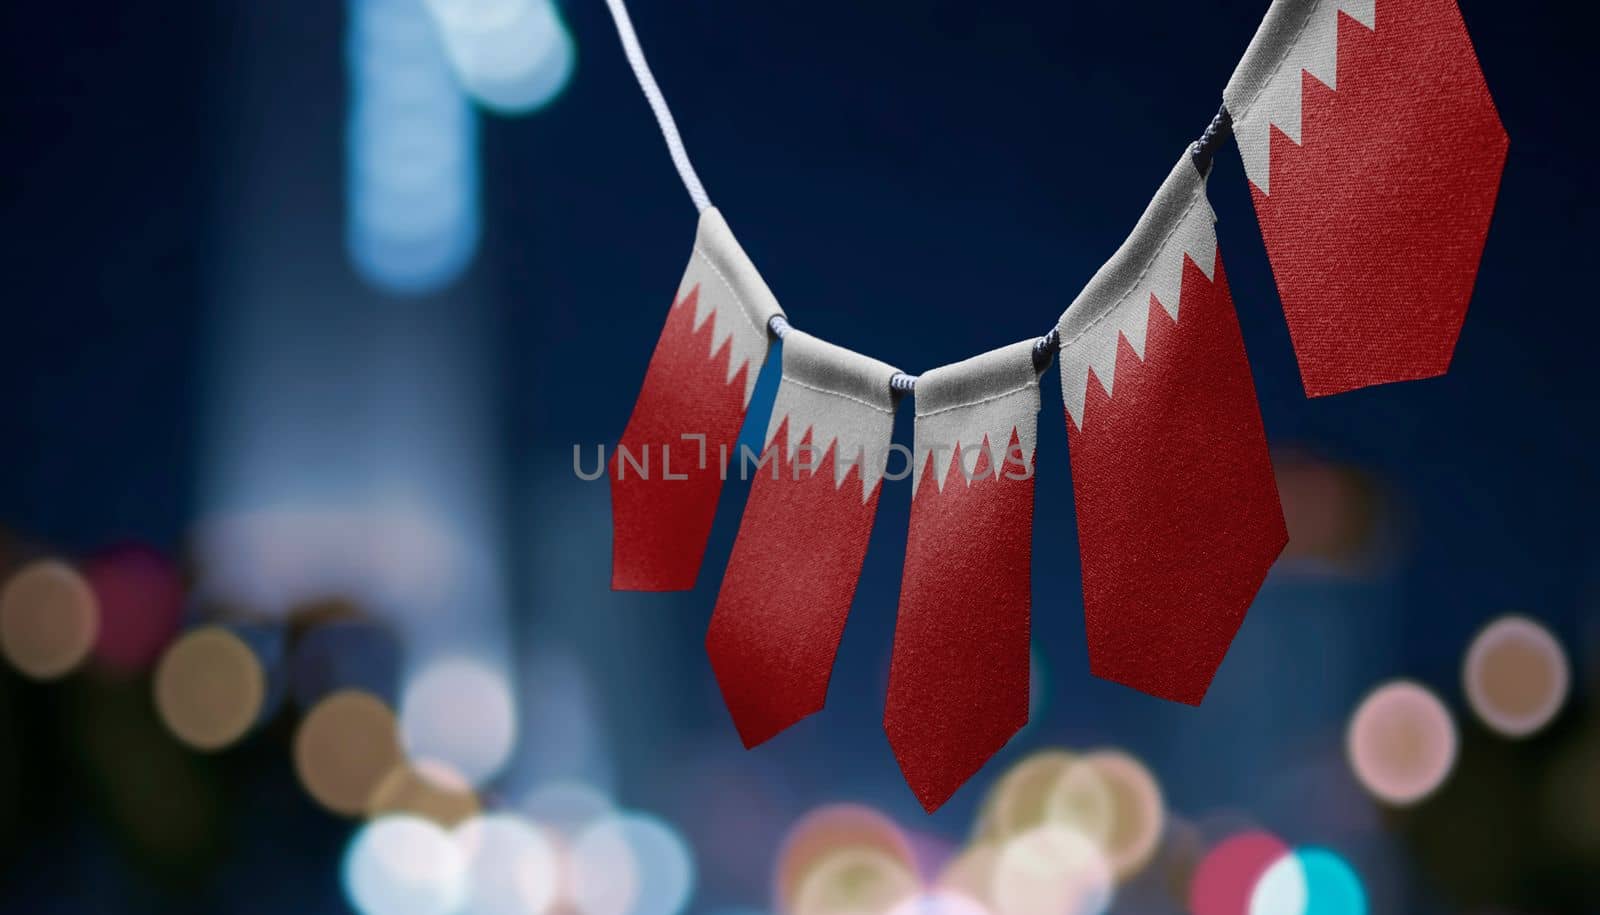 A garland of Bahrain national flags on an abstract blurred background by butenkow